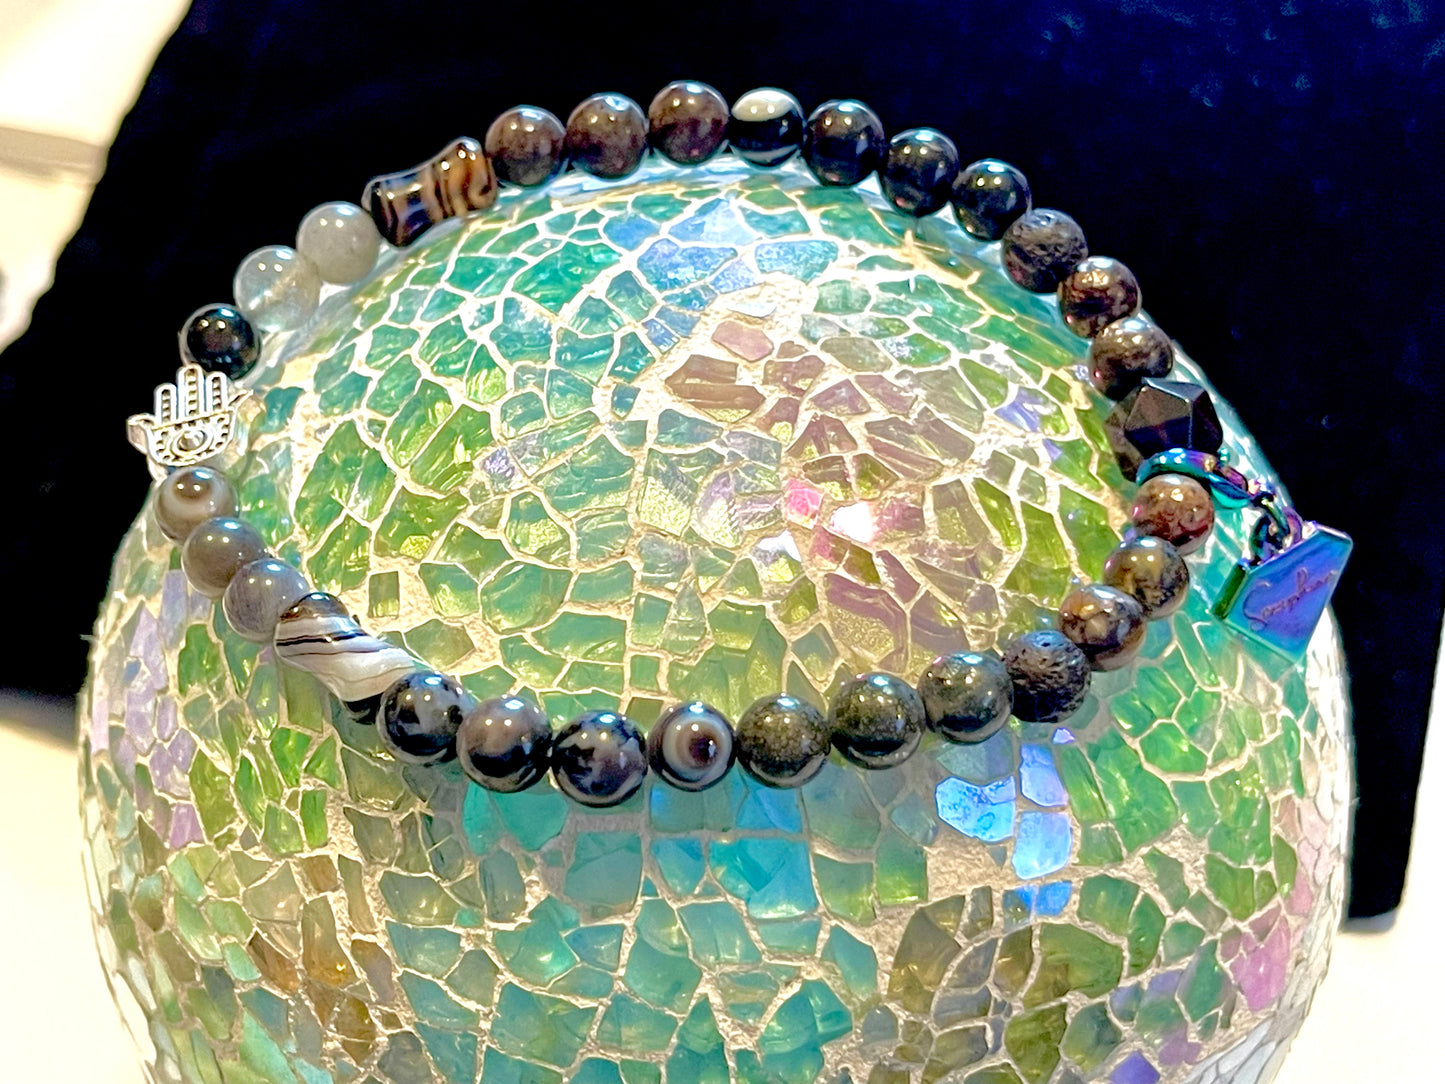 Custom Crystal Bead Bracelet - Choose Size, Quality, and Frequency Codes